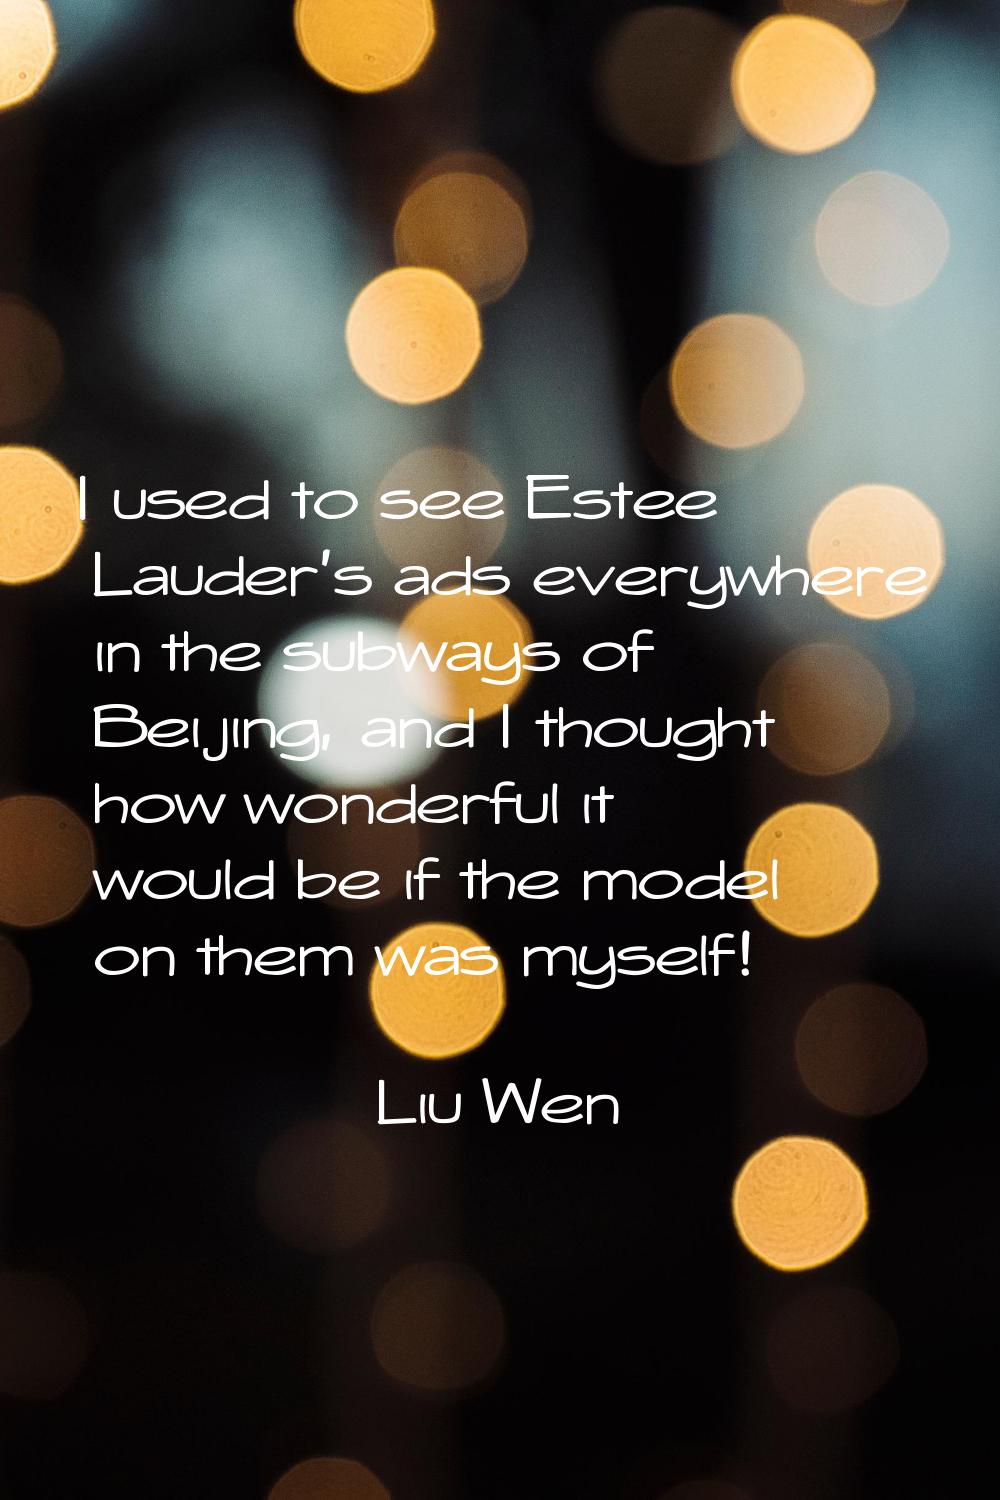 I used to see Estee Lauder's ads everywhere in the subways of Beijing, and I thought how wonderful 